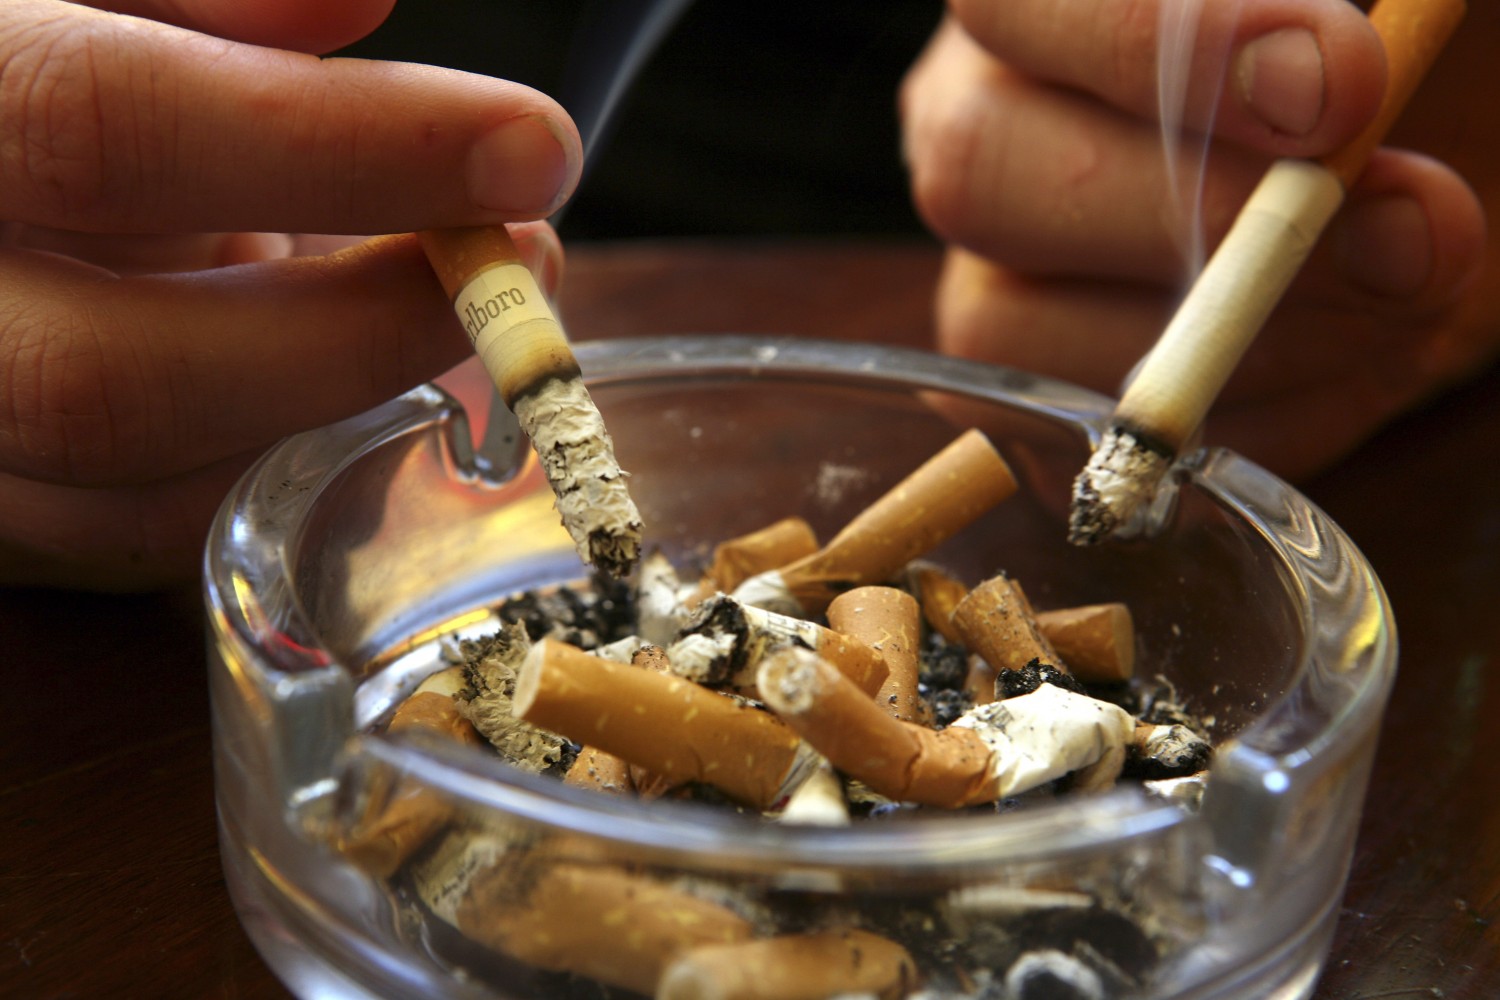 Smoking Ban Comes Into Effect In England